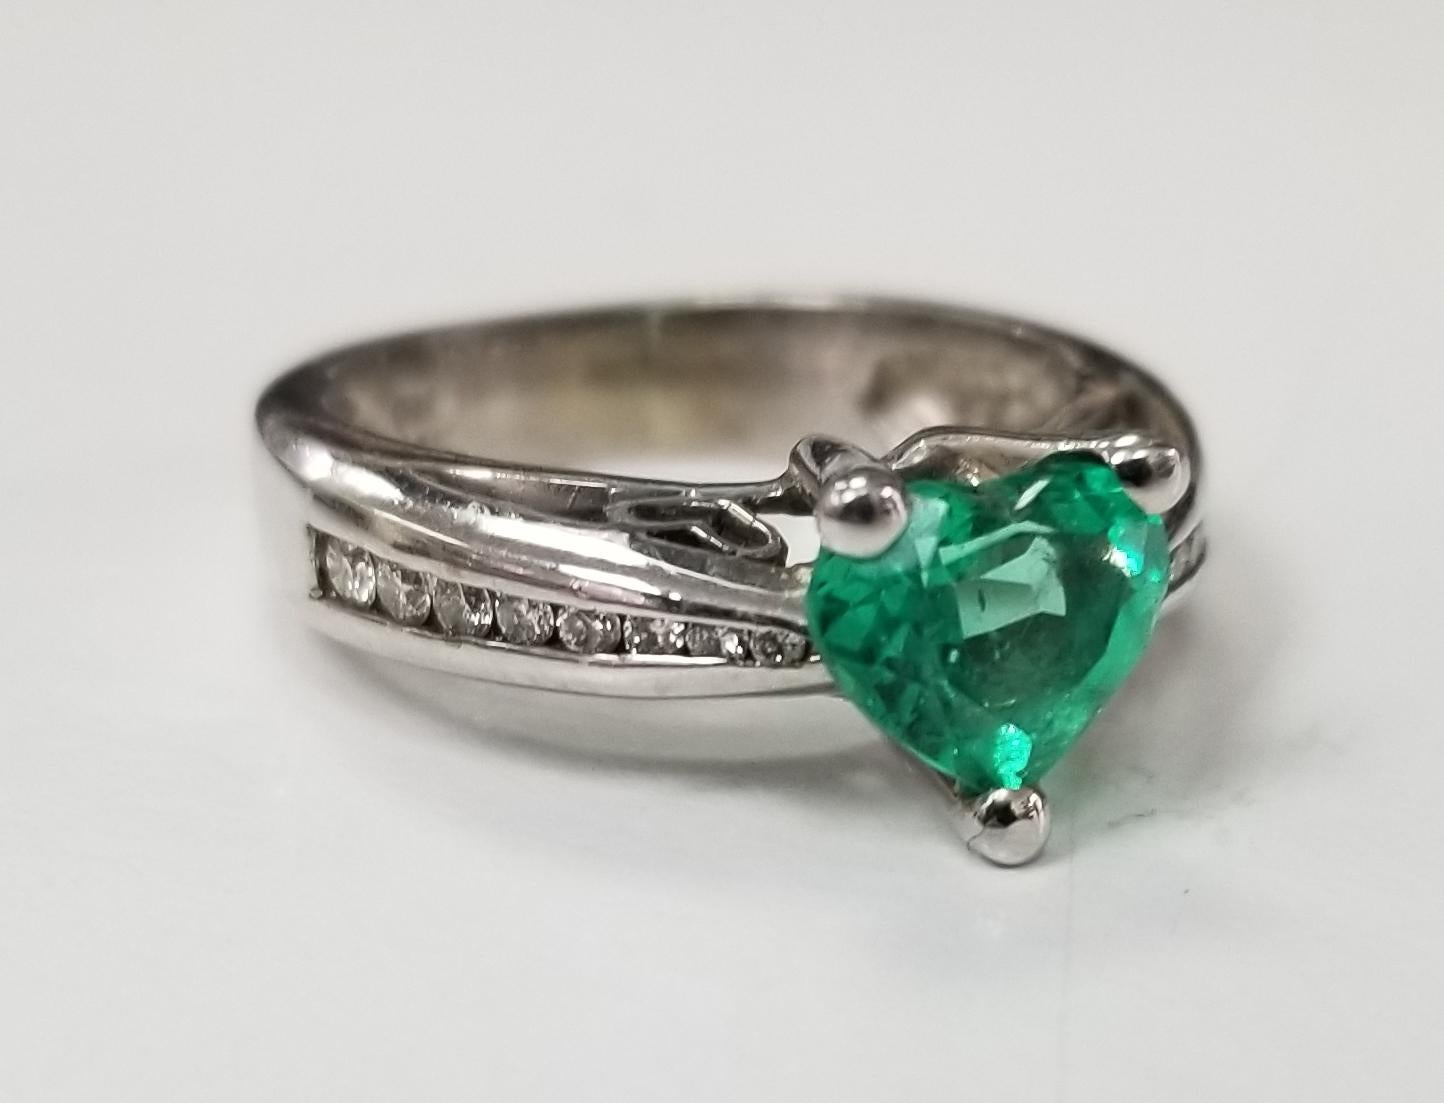 14k yellow gold Emerald and diamond ring, containing 1 heart shape cut emerald of gem quality  weighing 1.03cts. and 16 round full cut diamonds weighing .20pts.  This ring is a size 5 but we will size to fit for free.